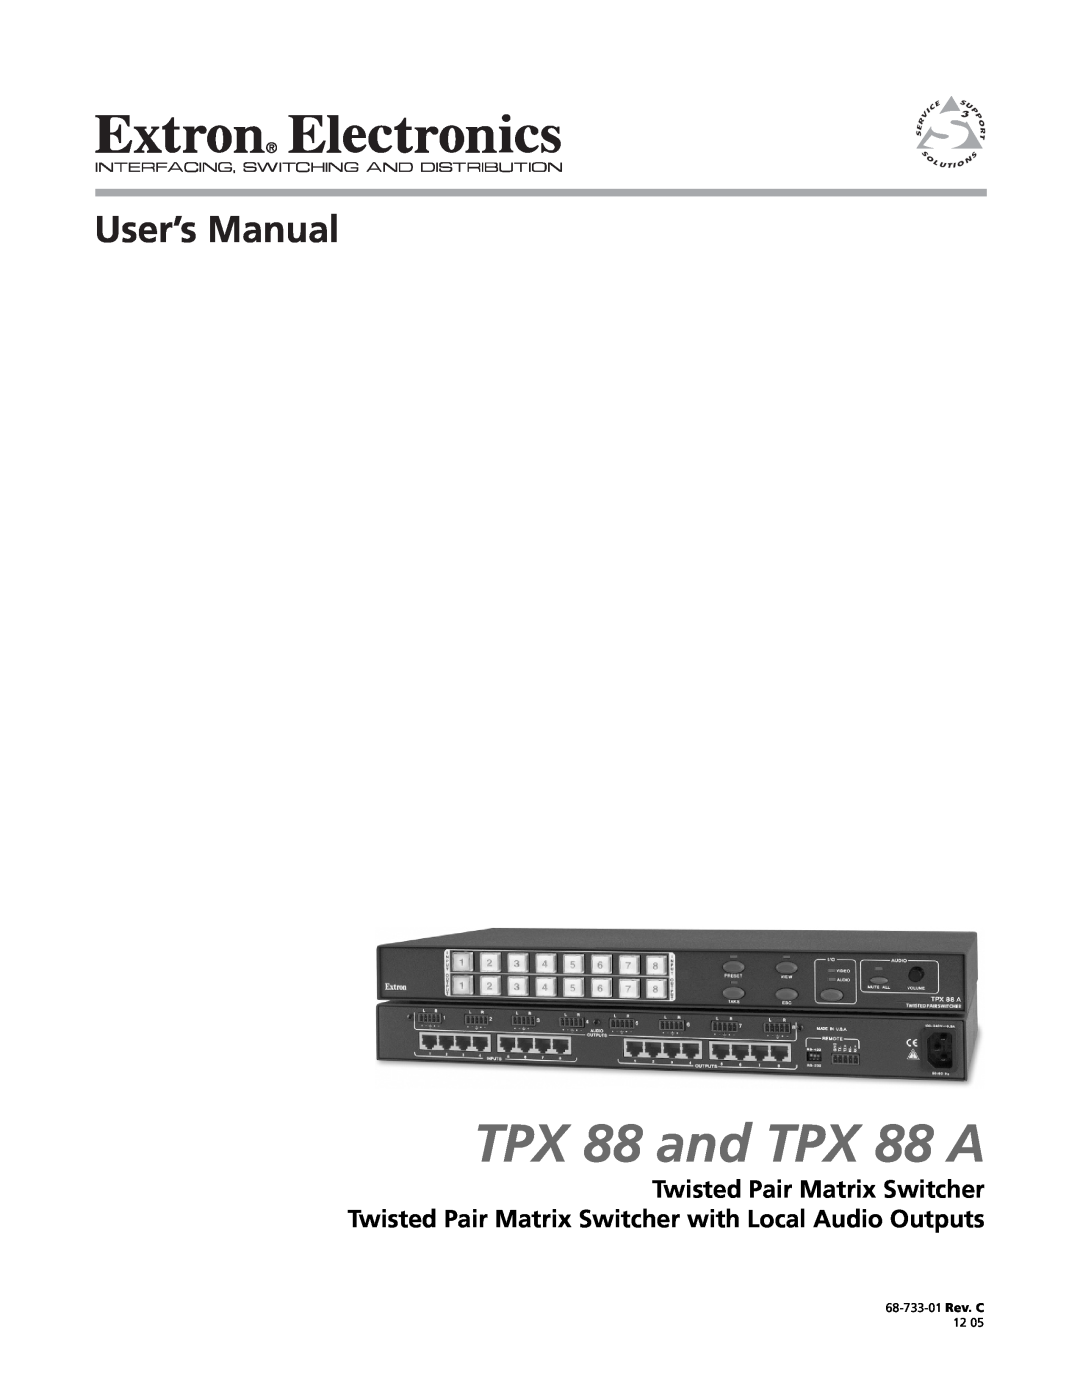 Extron electronic manual TPX 88 and TPX 88 A, 68-733-01 Rev. C 